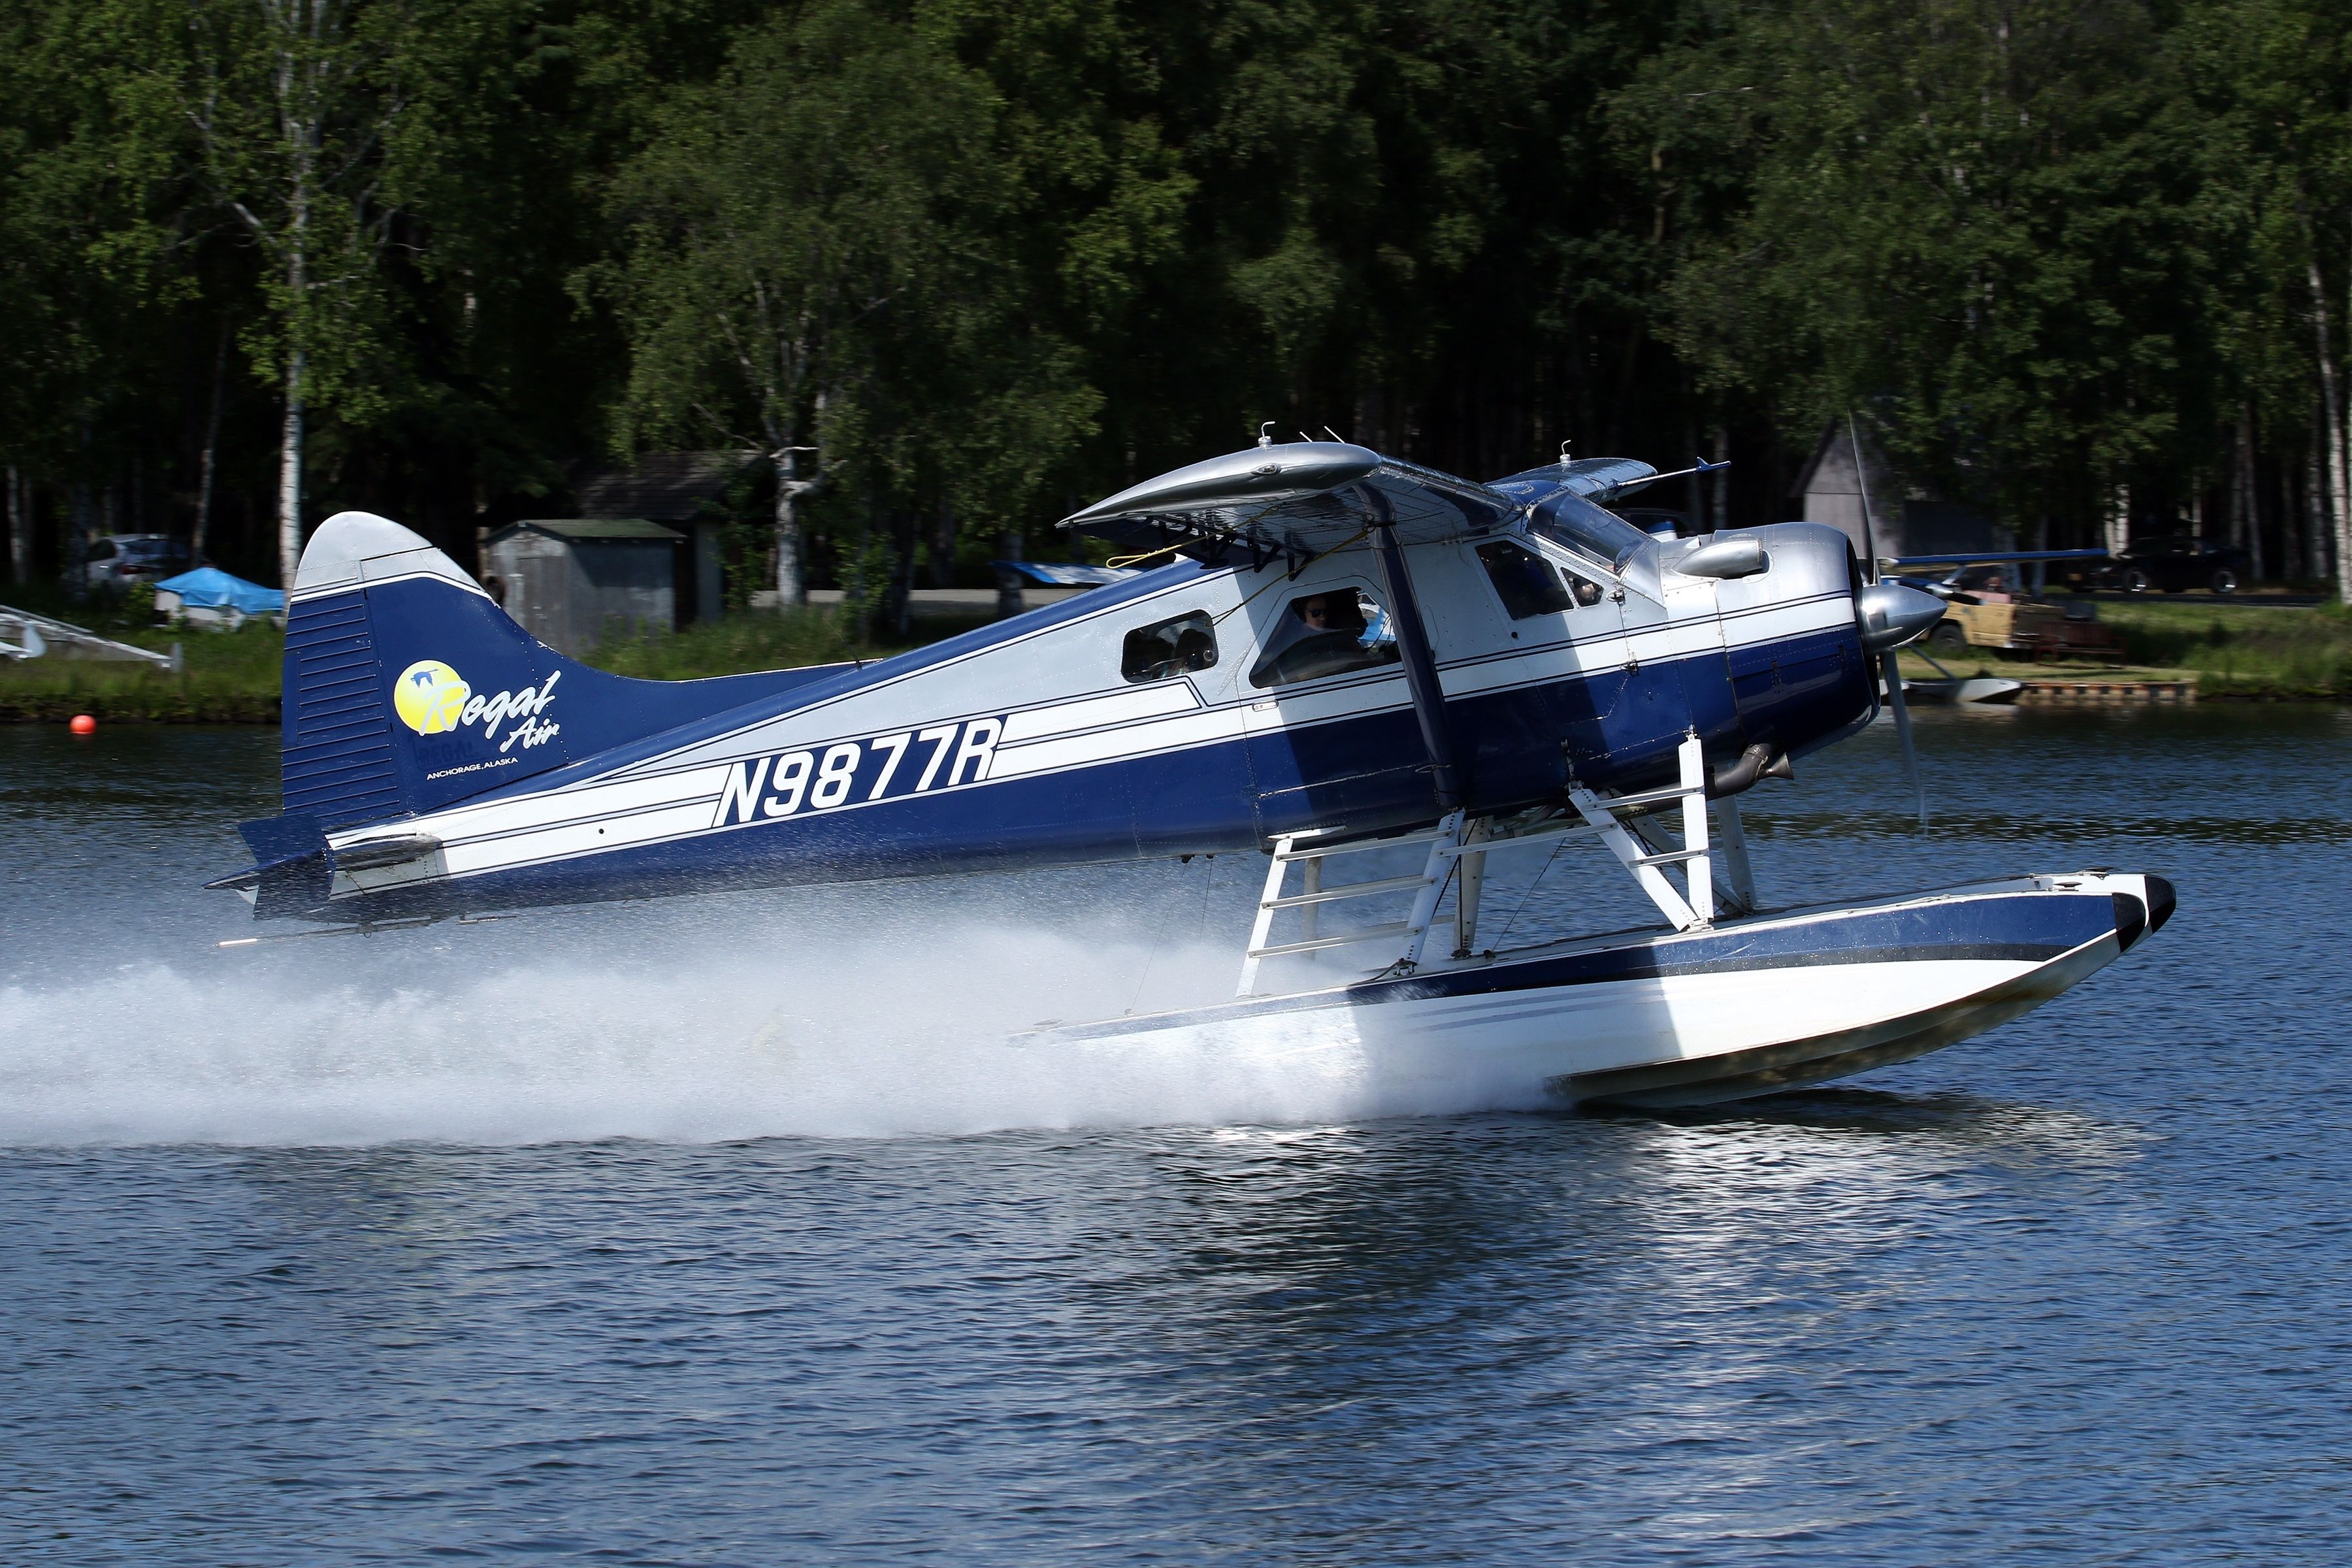 deHavilland Canada DHC-2 Beaver floatplane operated by Regal Air taking off from Anchorage Lake Hood Seaplane Base.